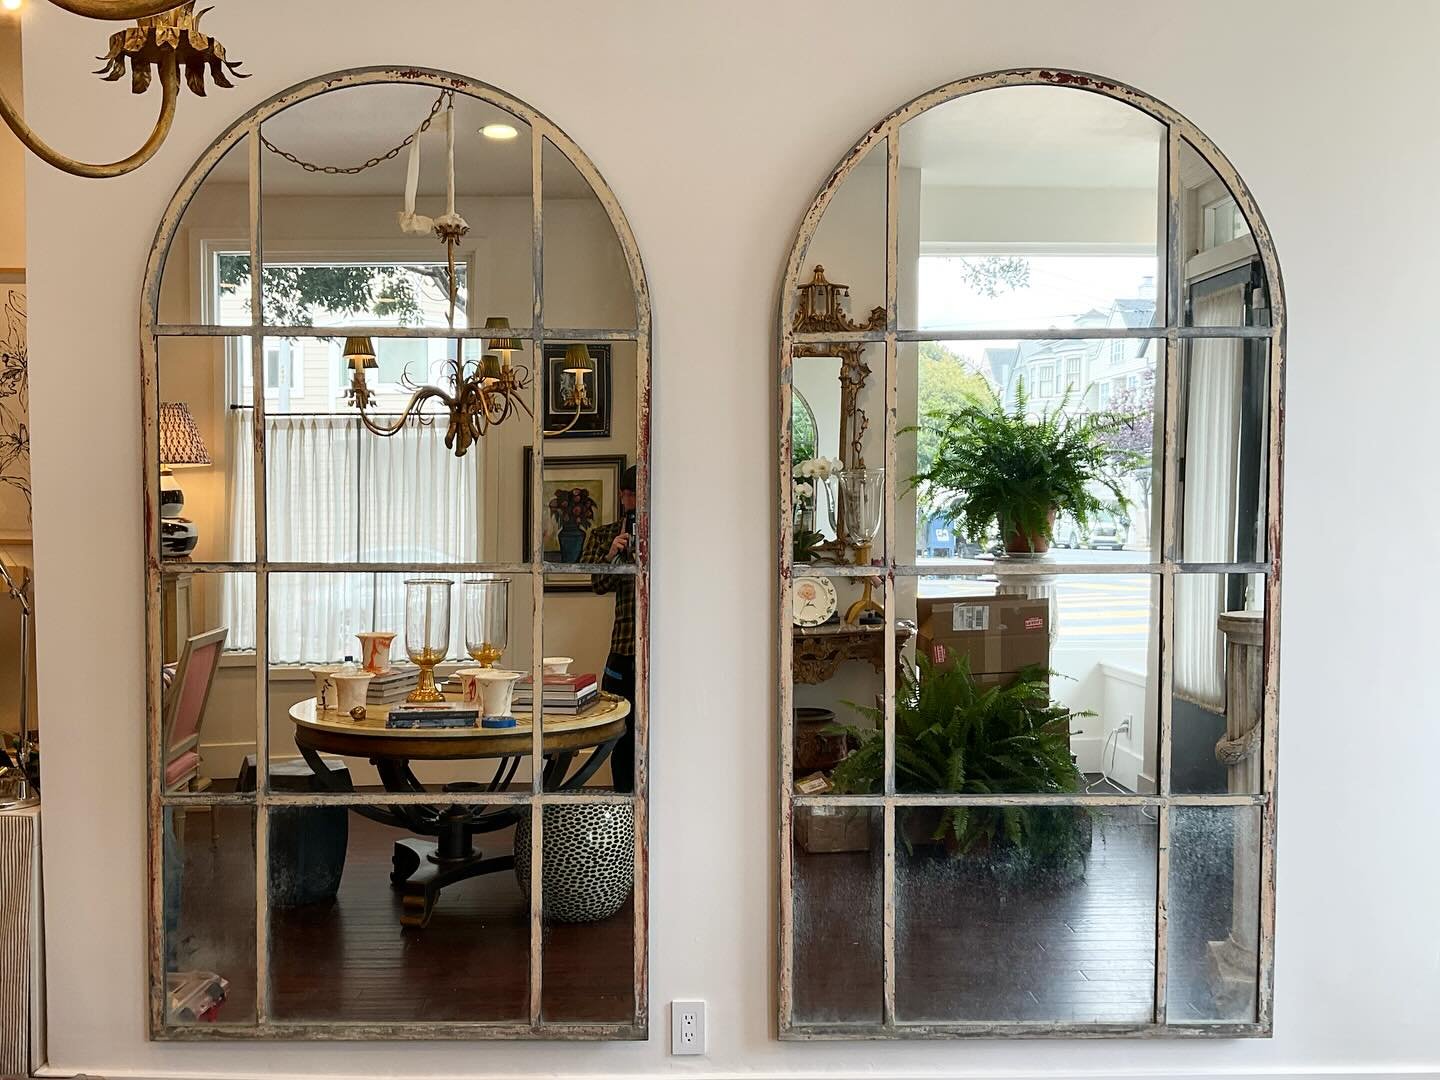 Let our team elevate your space with a grand mirror installation! 

#mirrorinstallation #mirrorhandling #sanfranciscoinstaller